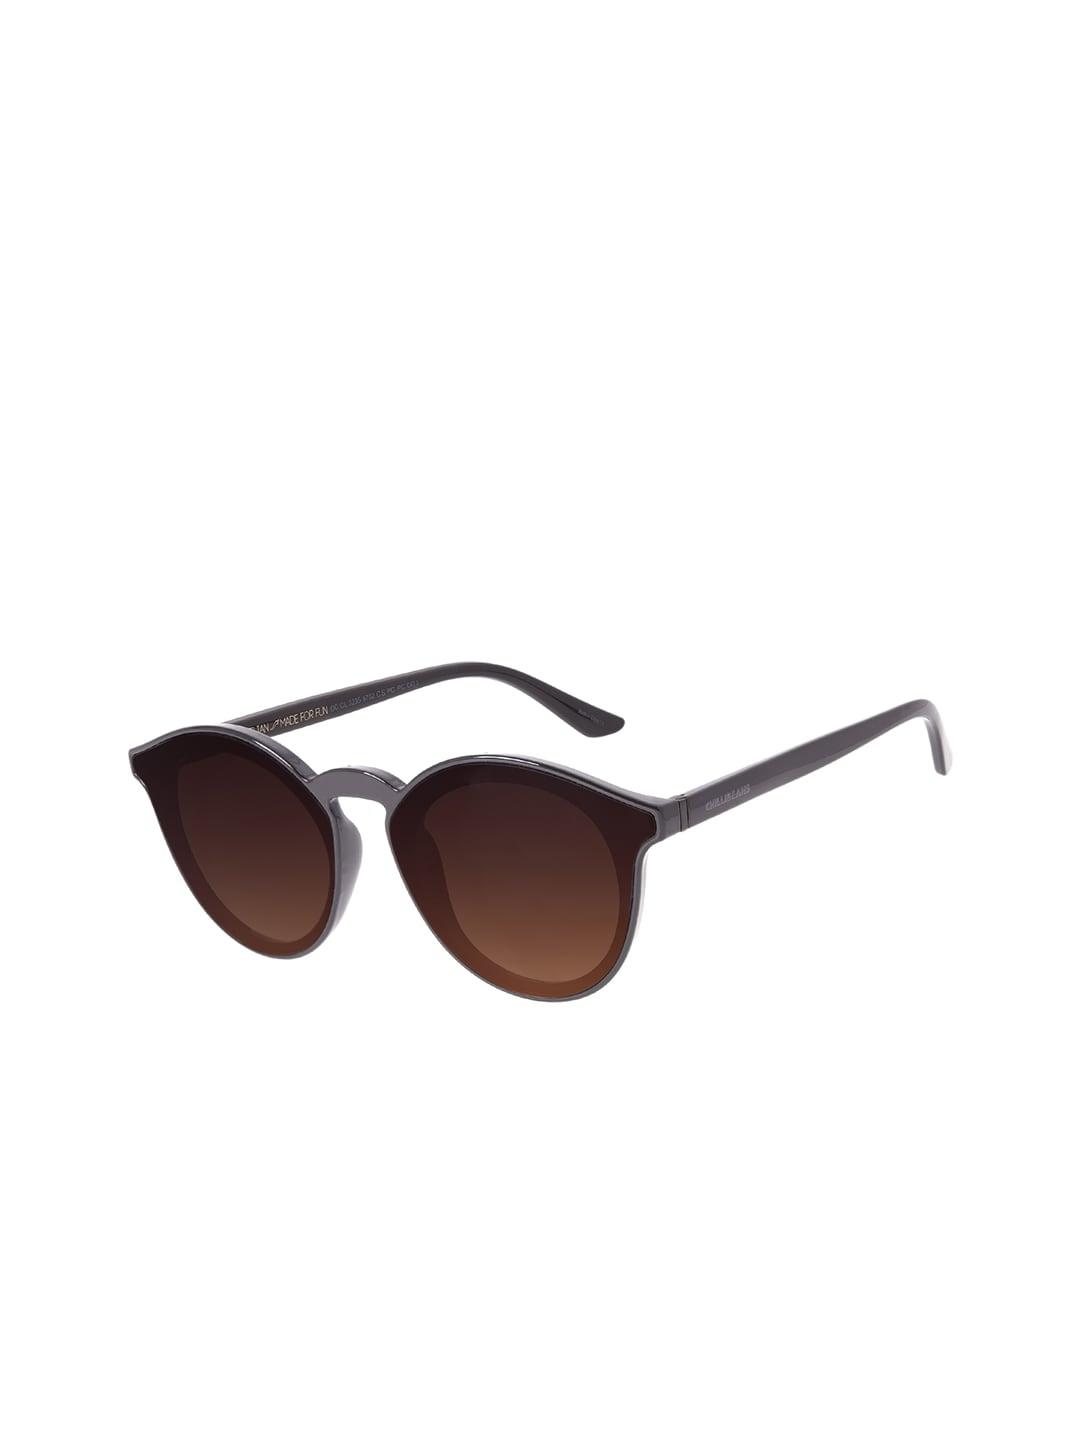 Chilli Beans Unisex Brown Lens & Black Round Sunglasses with UV Protected Lens